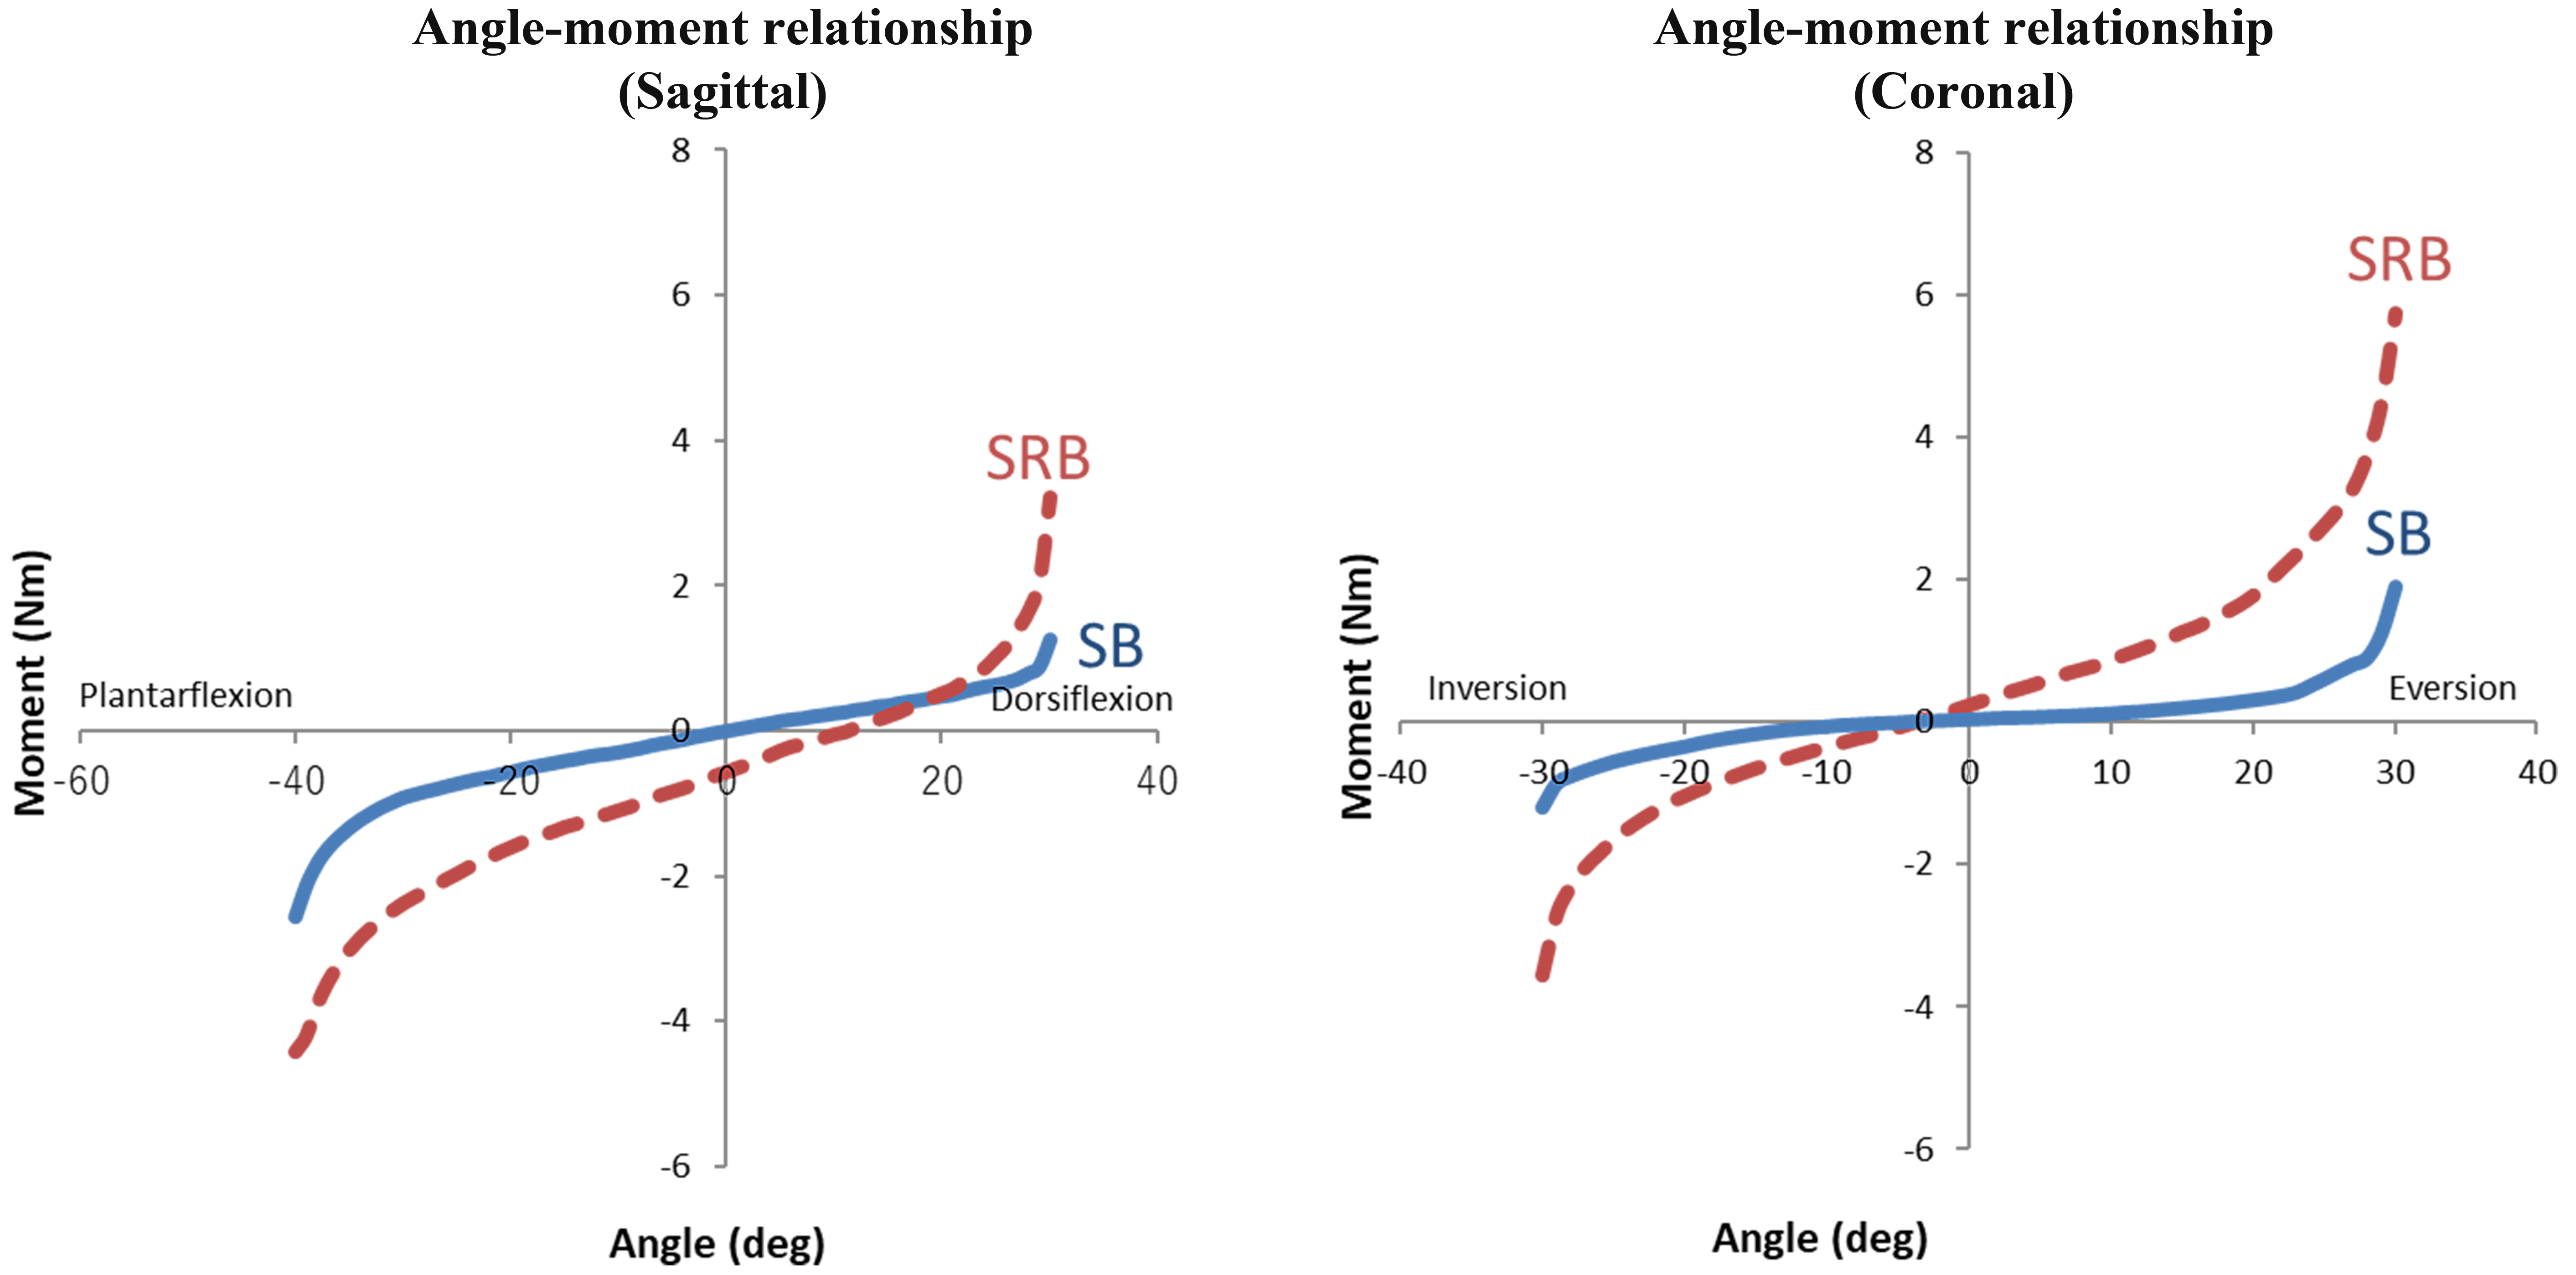 Angle-moment relationship of the SB and SRB in the sagittal and coronal plane.